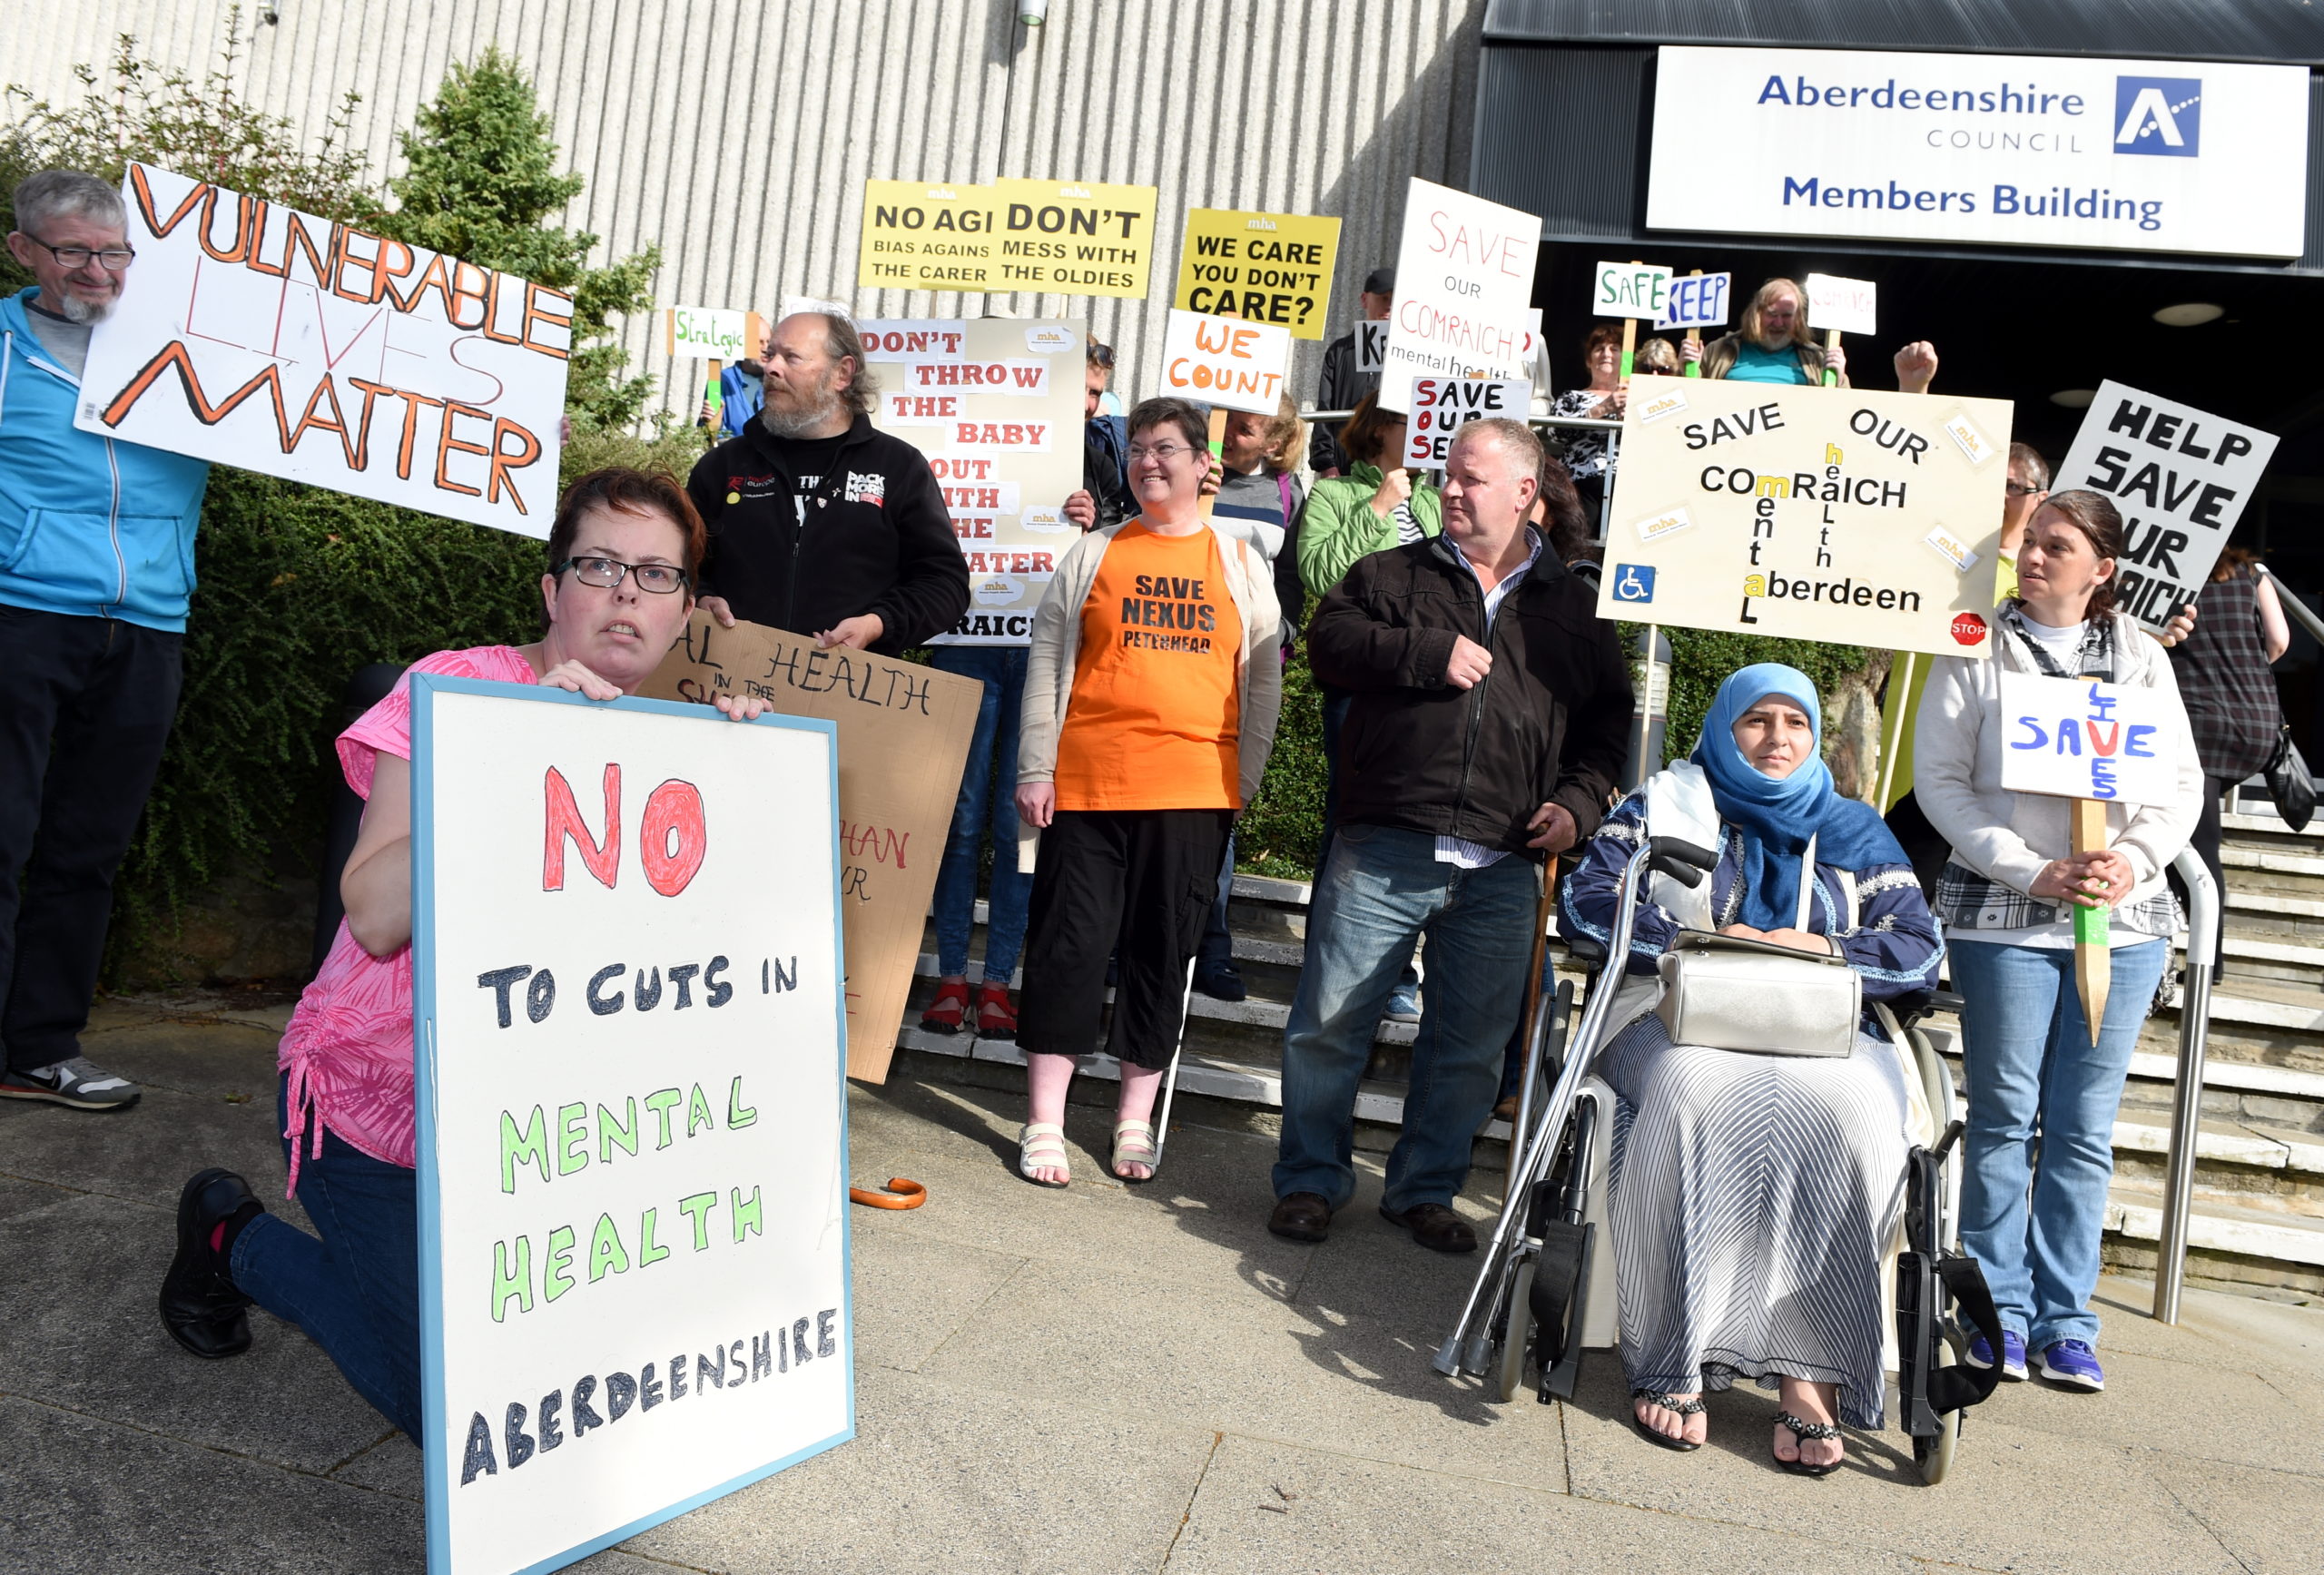 Protestors outside Aberdeenshire Council after cuts to Mental Health support in the region